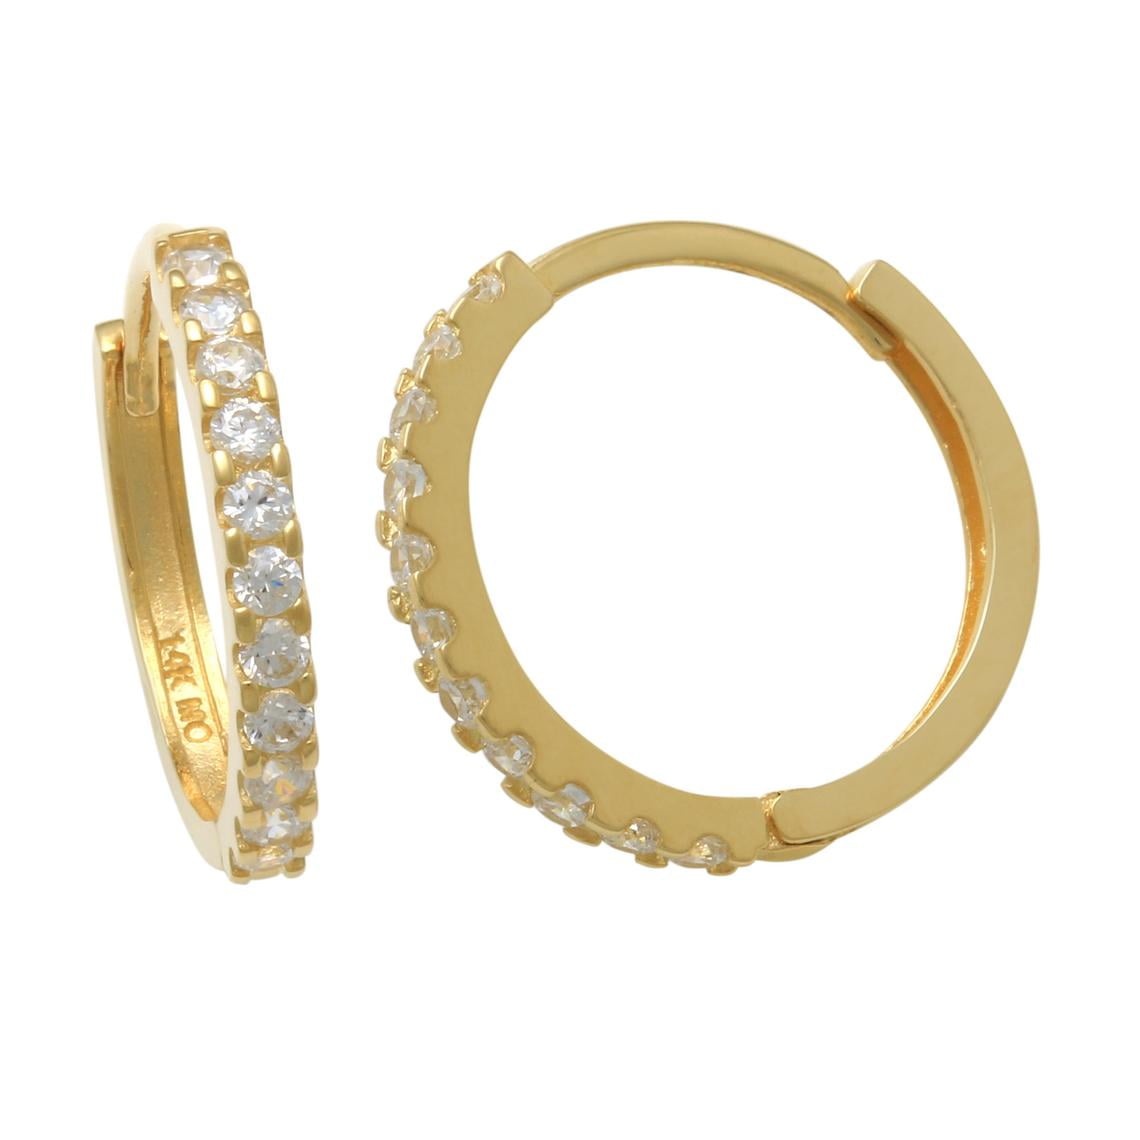 Anygolds Anygolds K Real Solid Gold Diamond Cz Hoop Earring